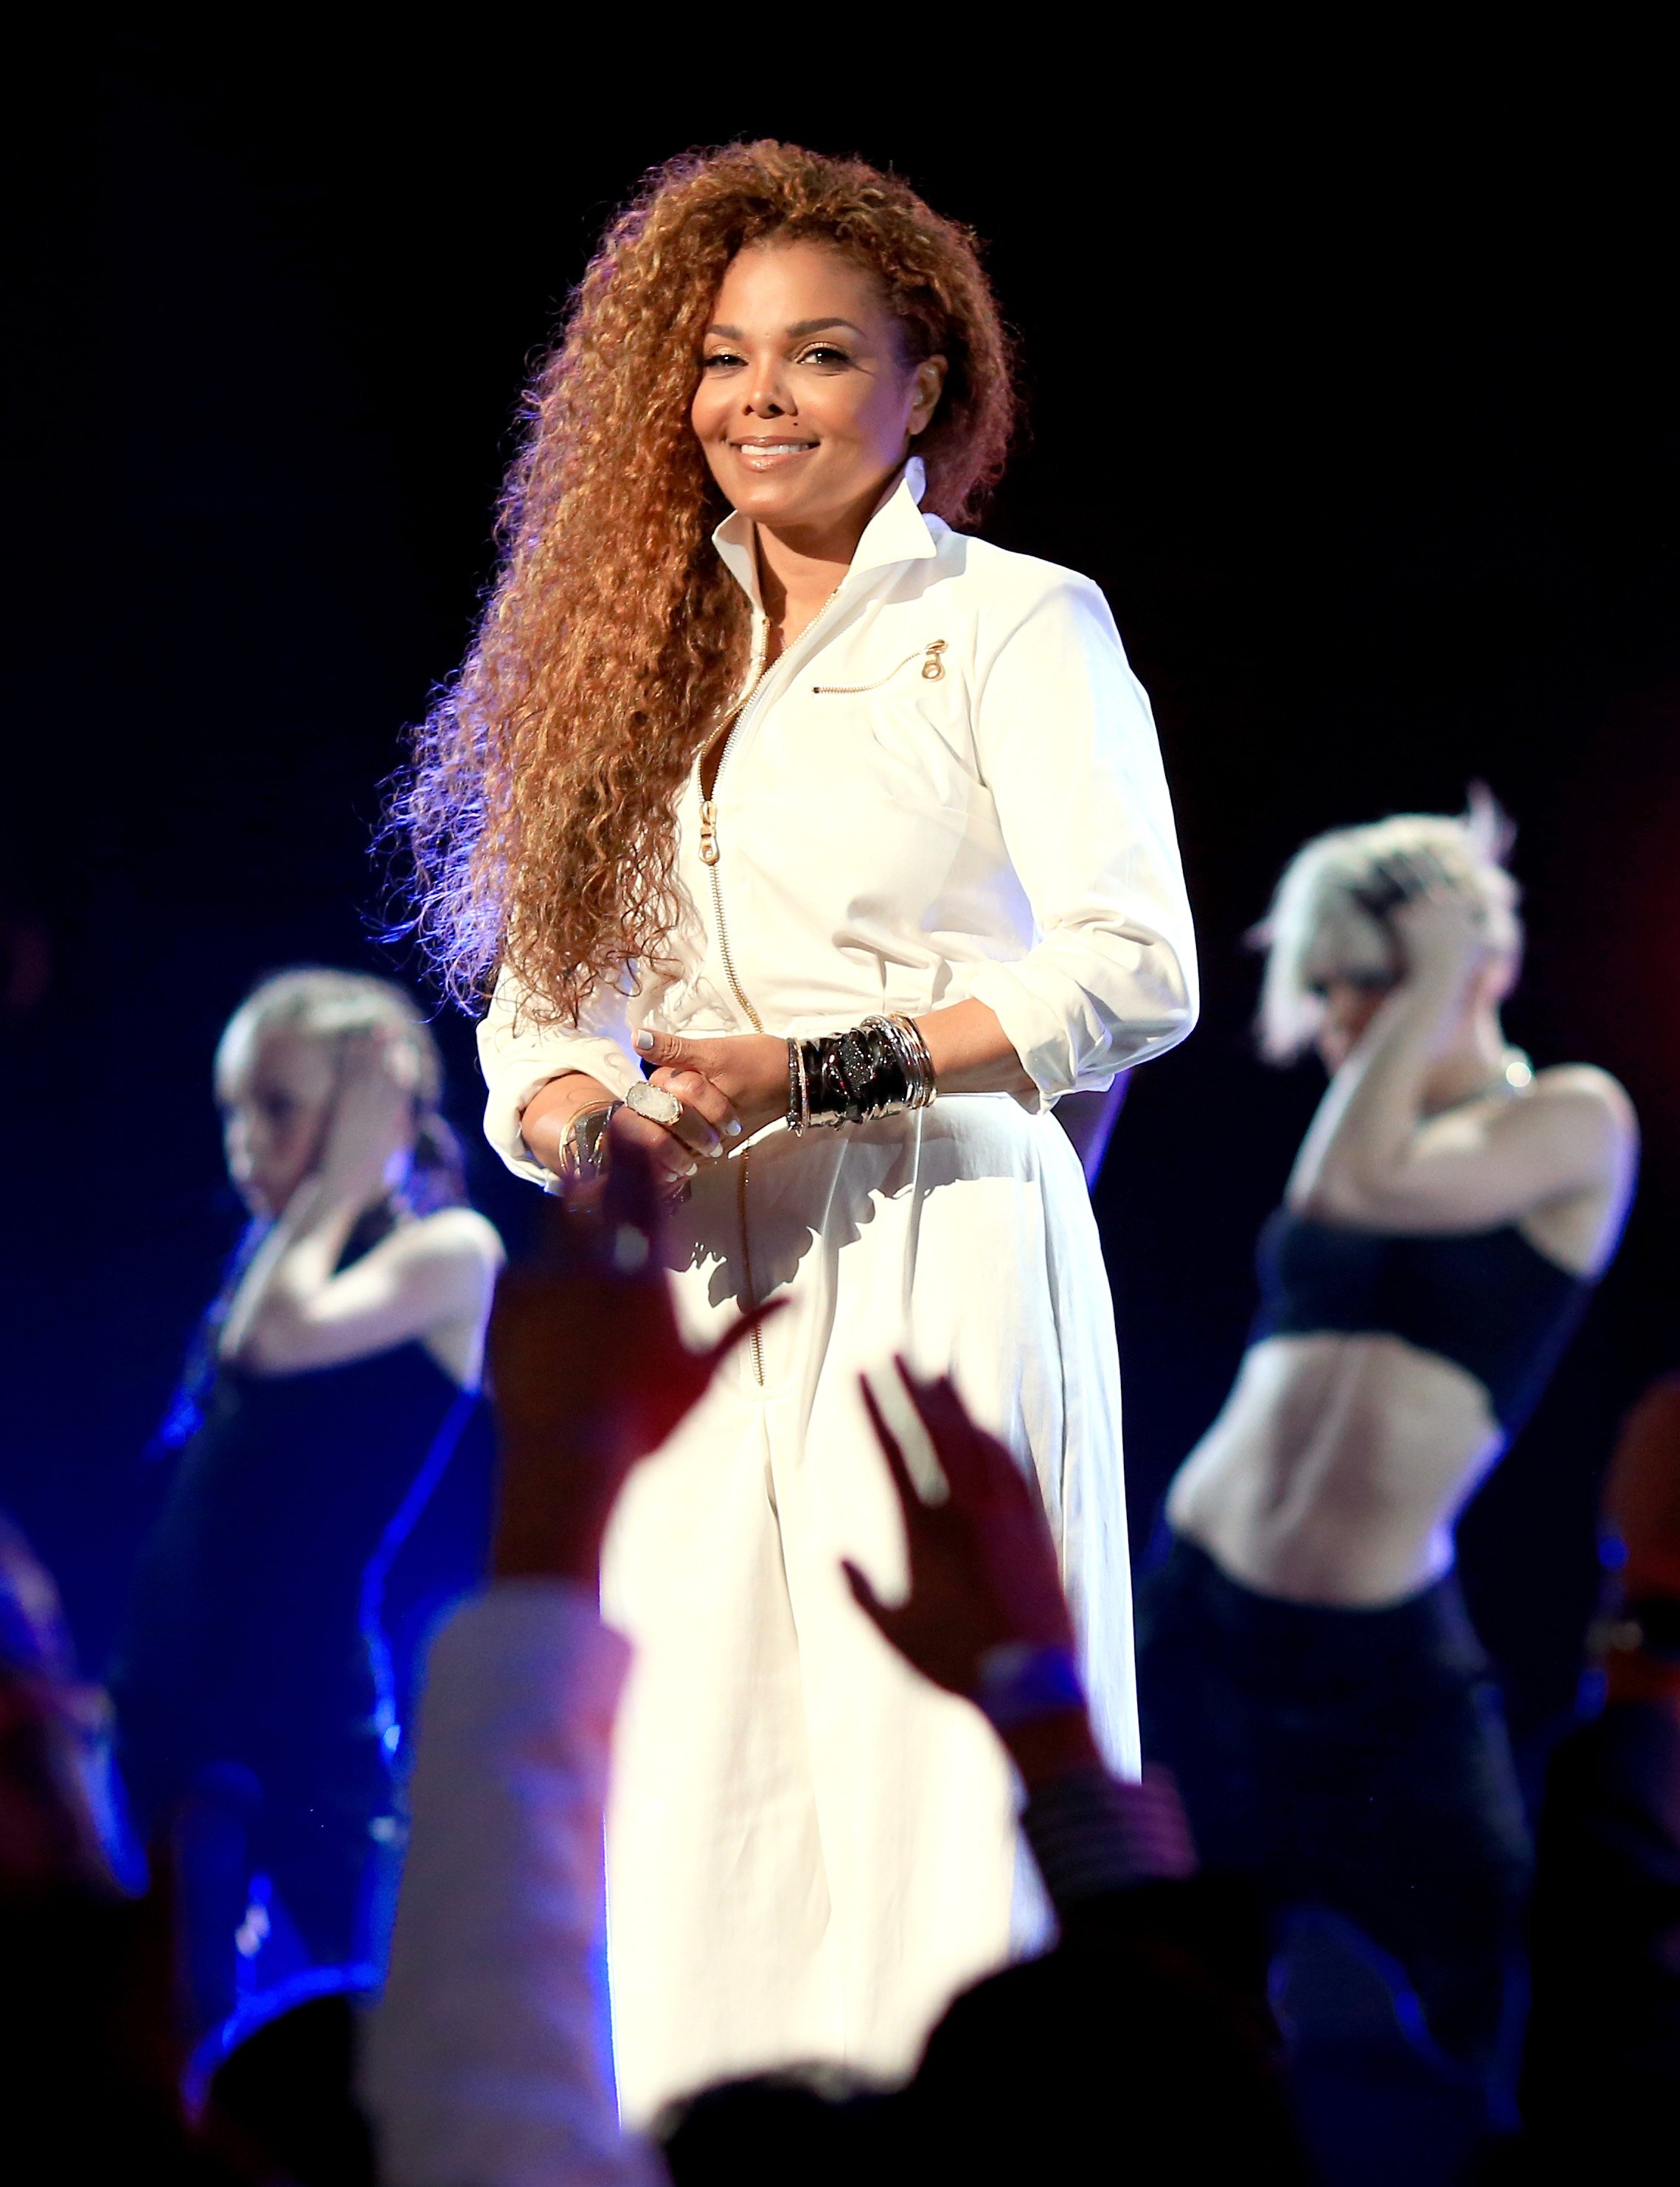 Janet Jackson at the BET Awards on June 28, 2015 in California | Photo: Getty Images